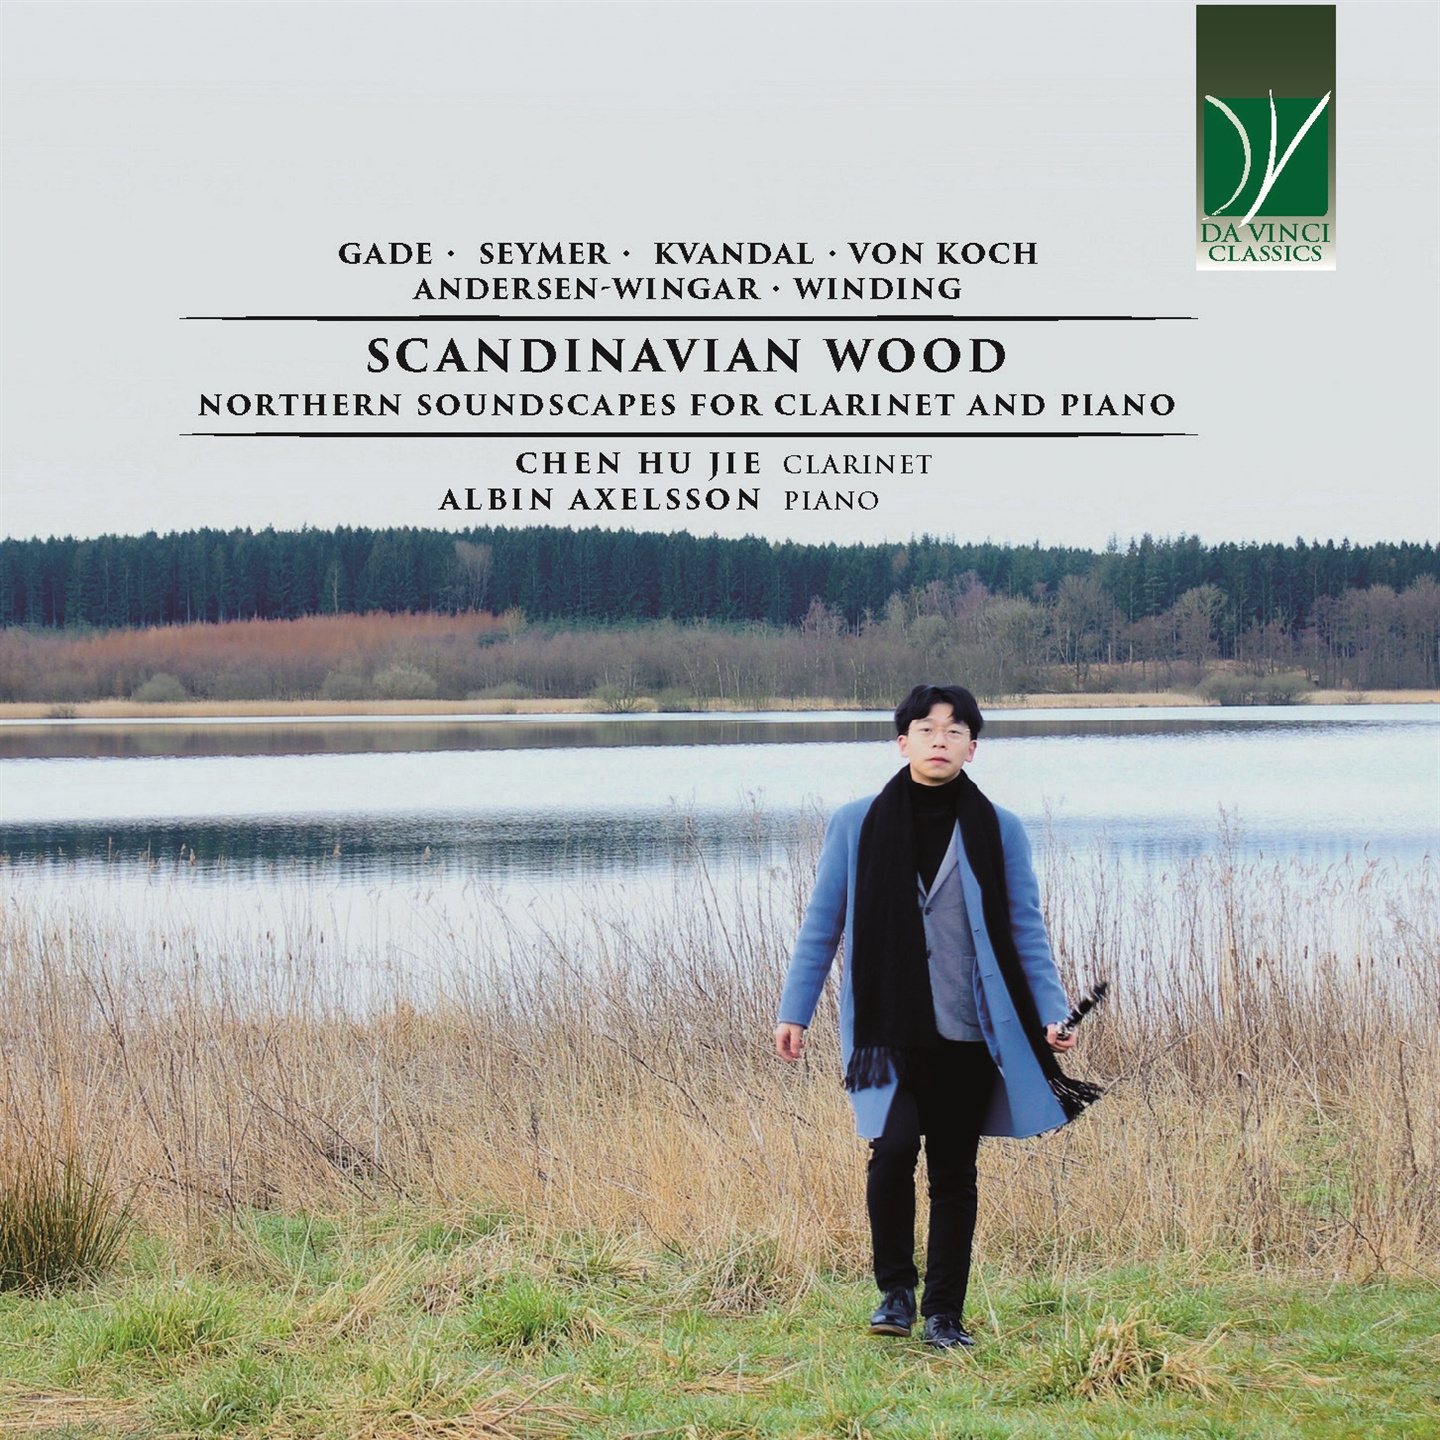 SCANDINAVIAN WOOD: NORTHERN SOUNDSCAPES FOR CLARINET AND PIANO